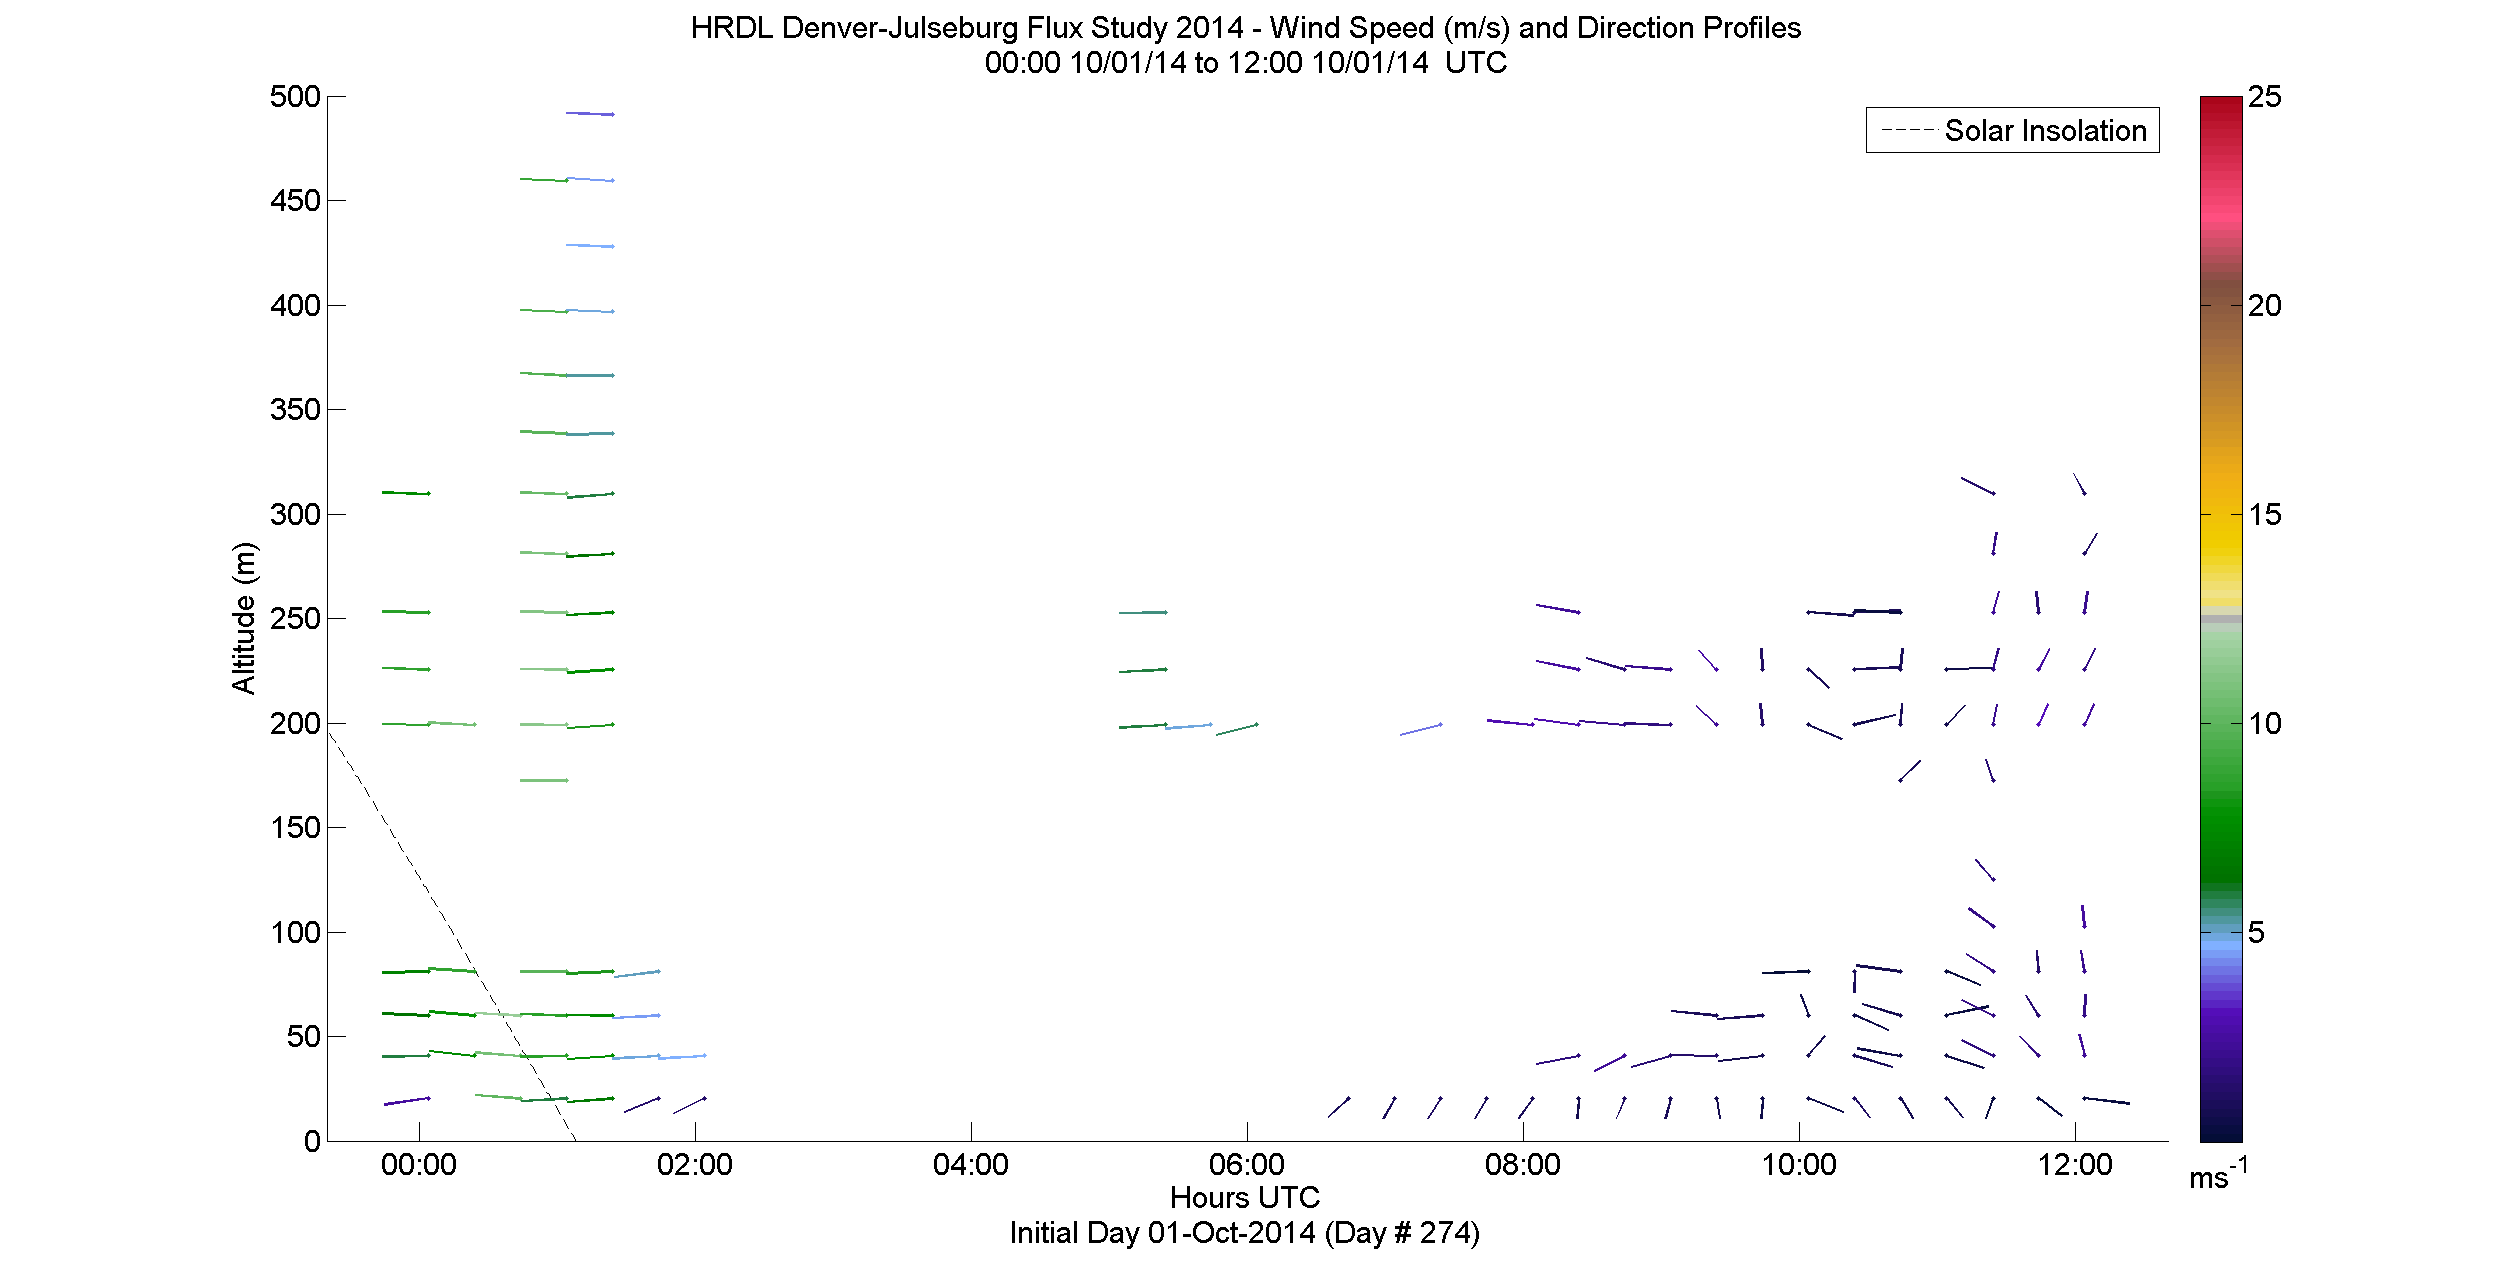 HRDL speed and direction profile - October 1 am